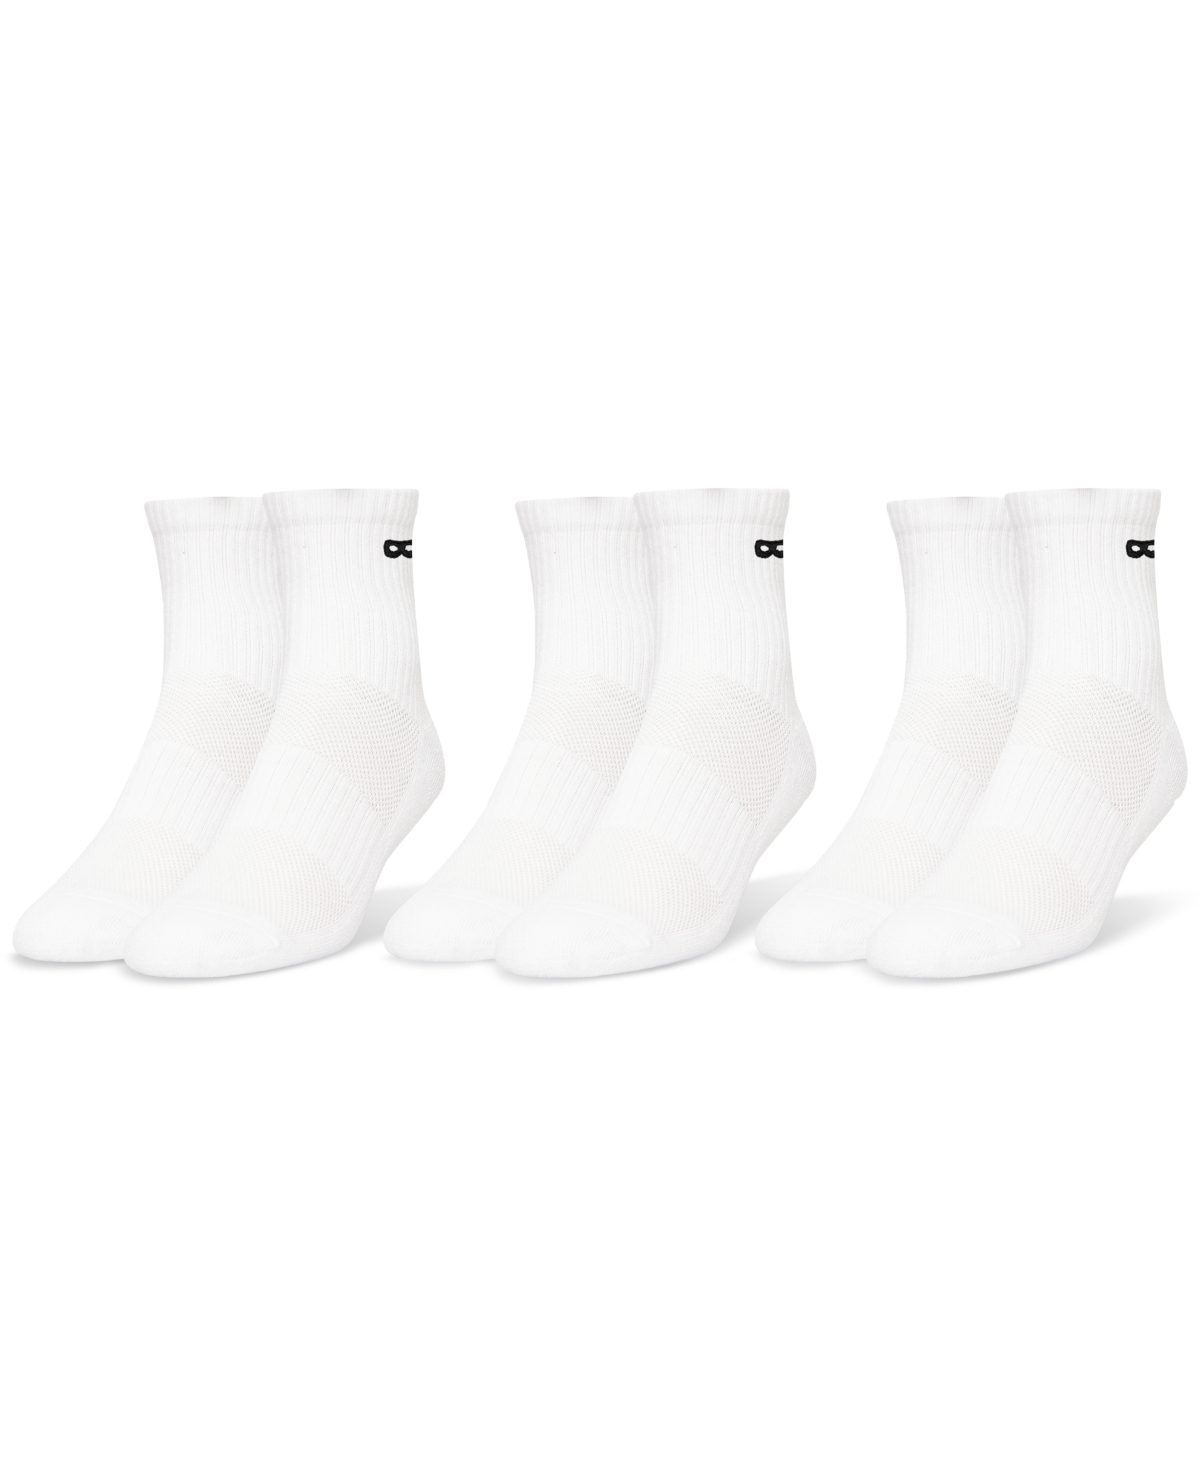 Men's Cushion Cotton Ankle Socks 3 Pack - Taupe